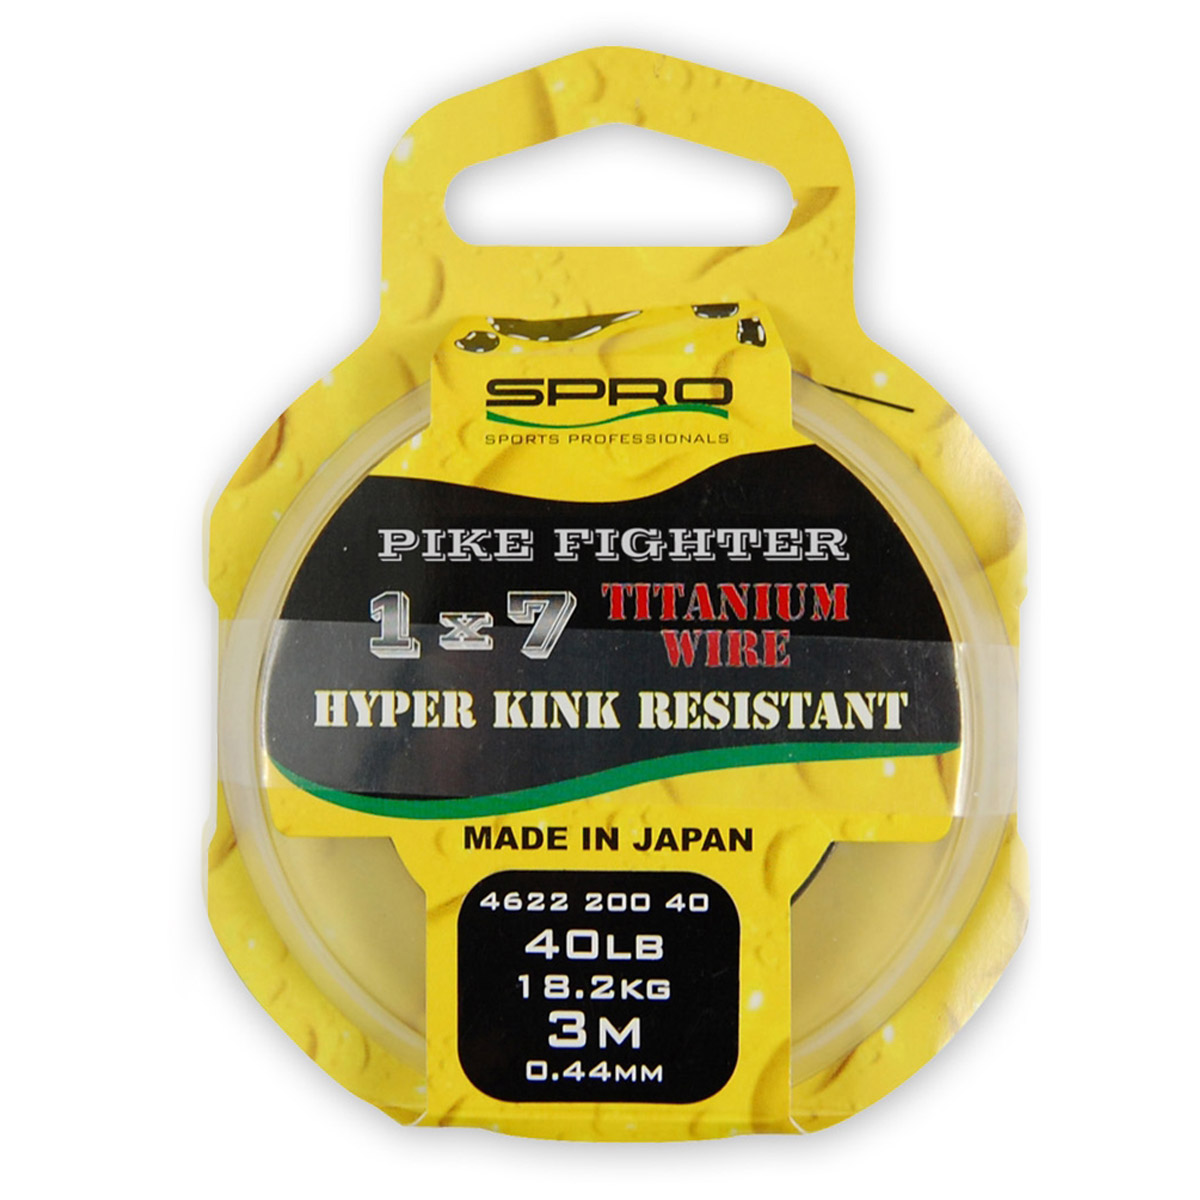 Spro Pike Fighter Titanium Wire -  40 lbs